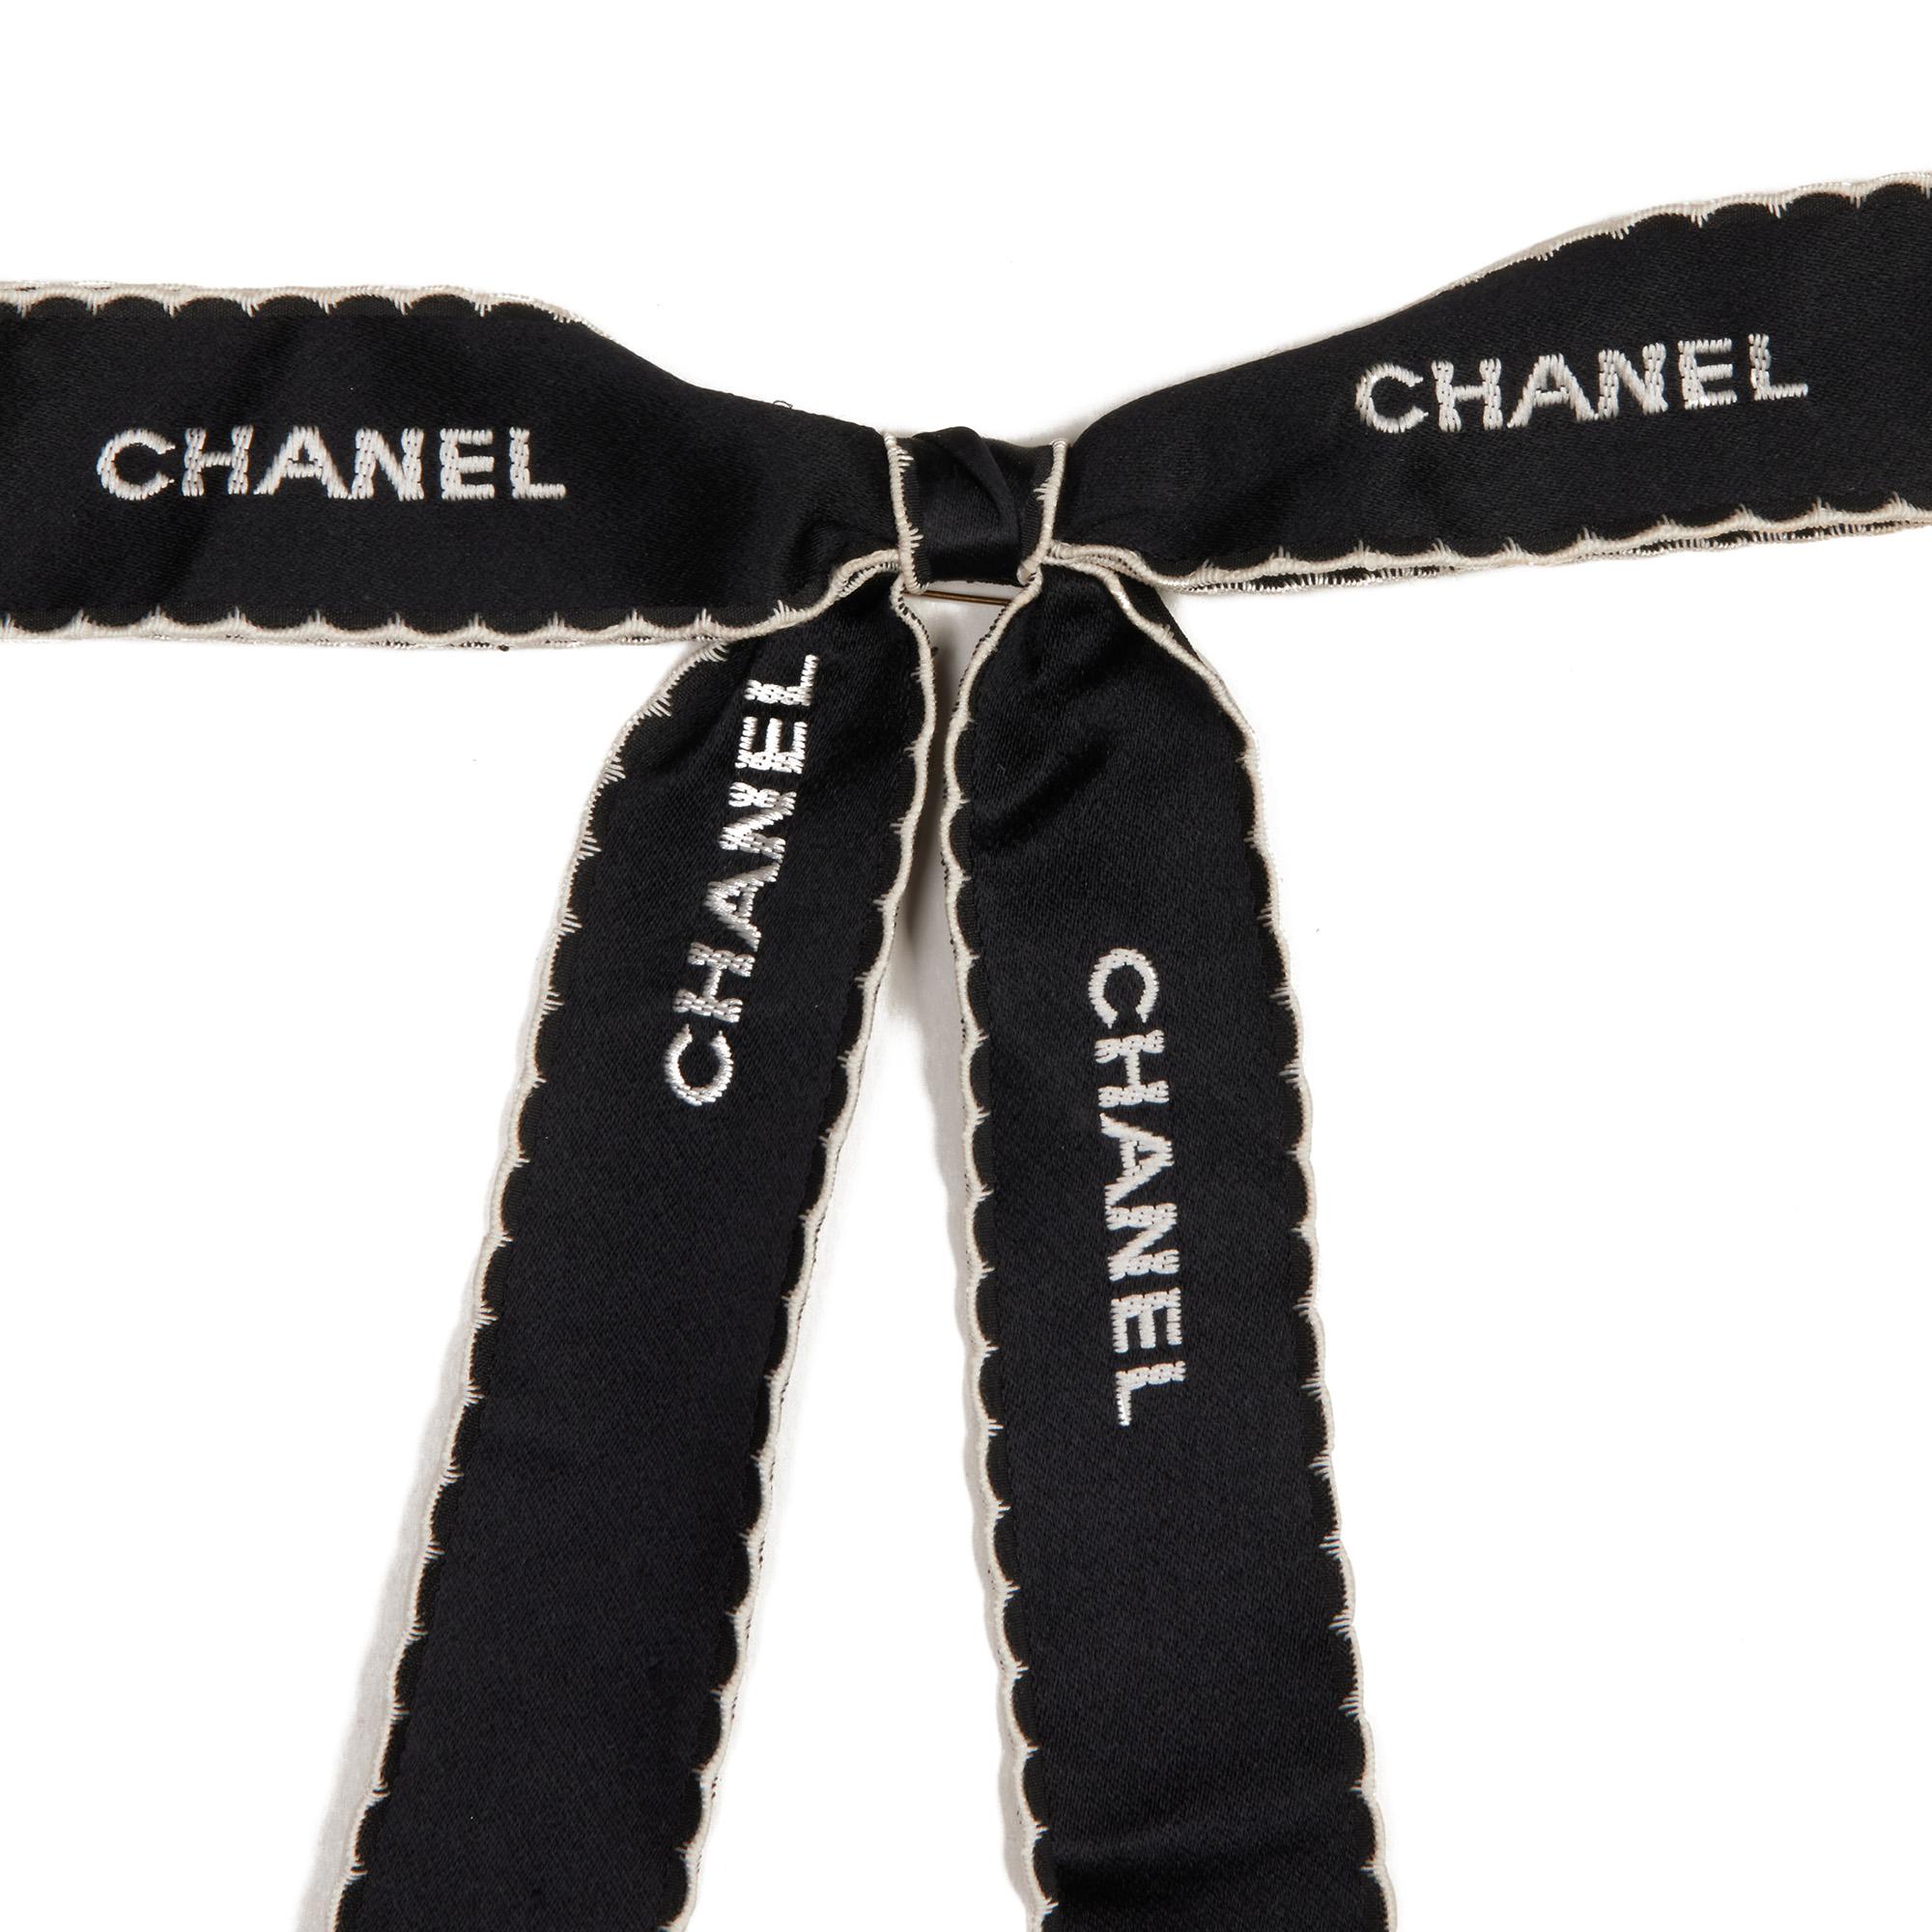 Chanel BLACK SATIN VINTAGE RIBBON PIN

CONDITION NOTES
The exterior is in very good condition with minimal signs of use.
The hardware is in very good condition with light signs of use. The Hardware shows slight signs of tarnishing.
Overall this item